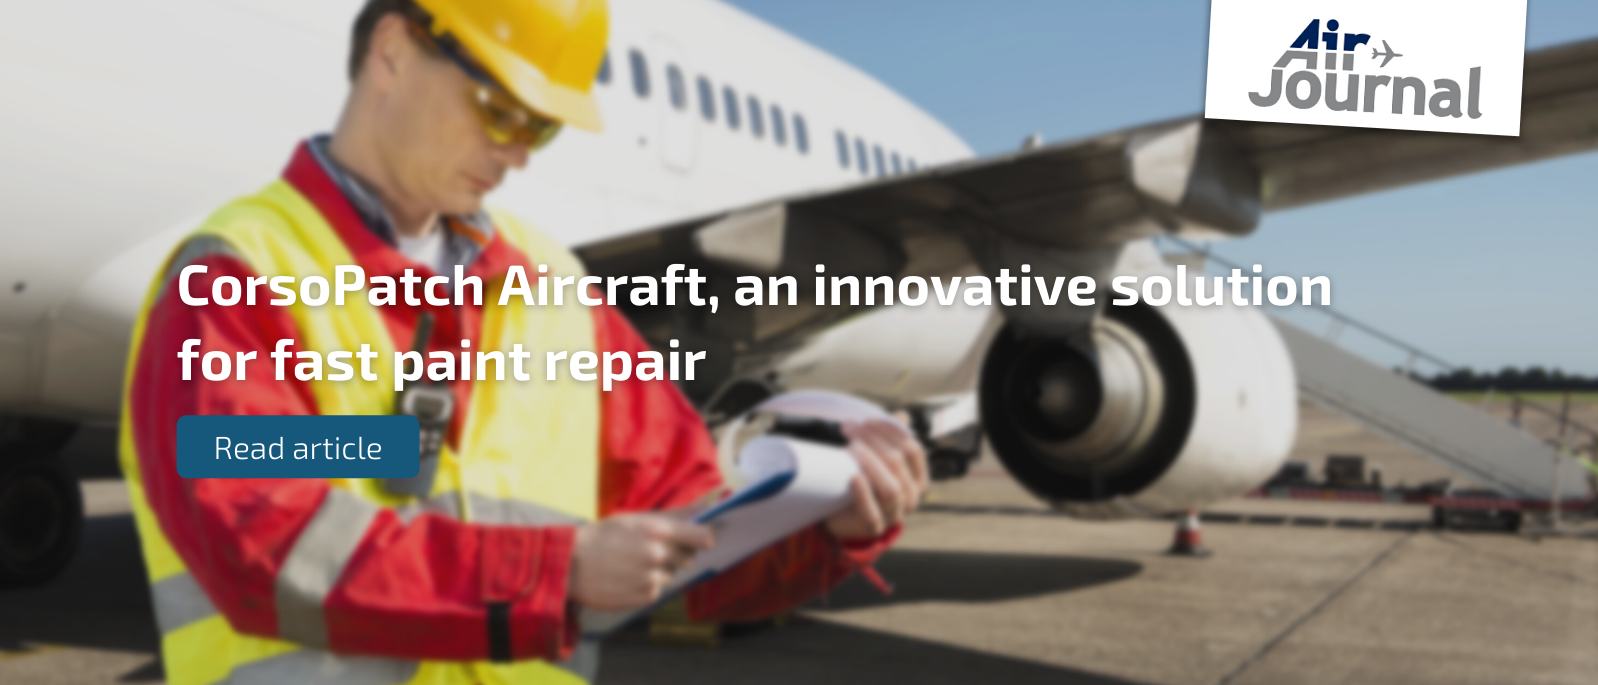 Aircraft patch paint repair fast planes, Air Journal writes about CorsoPatch Aircraft